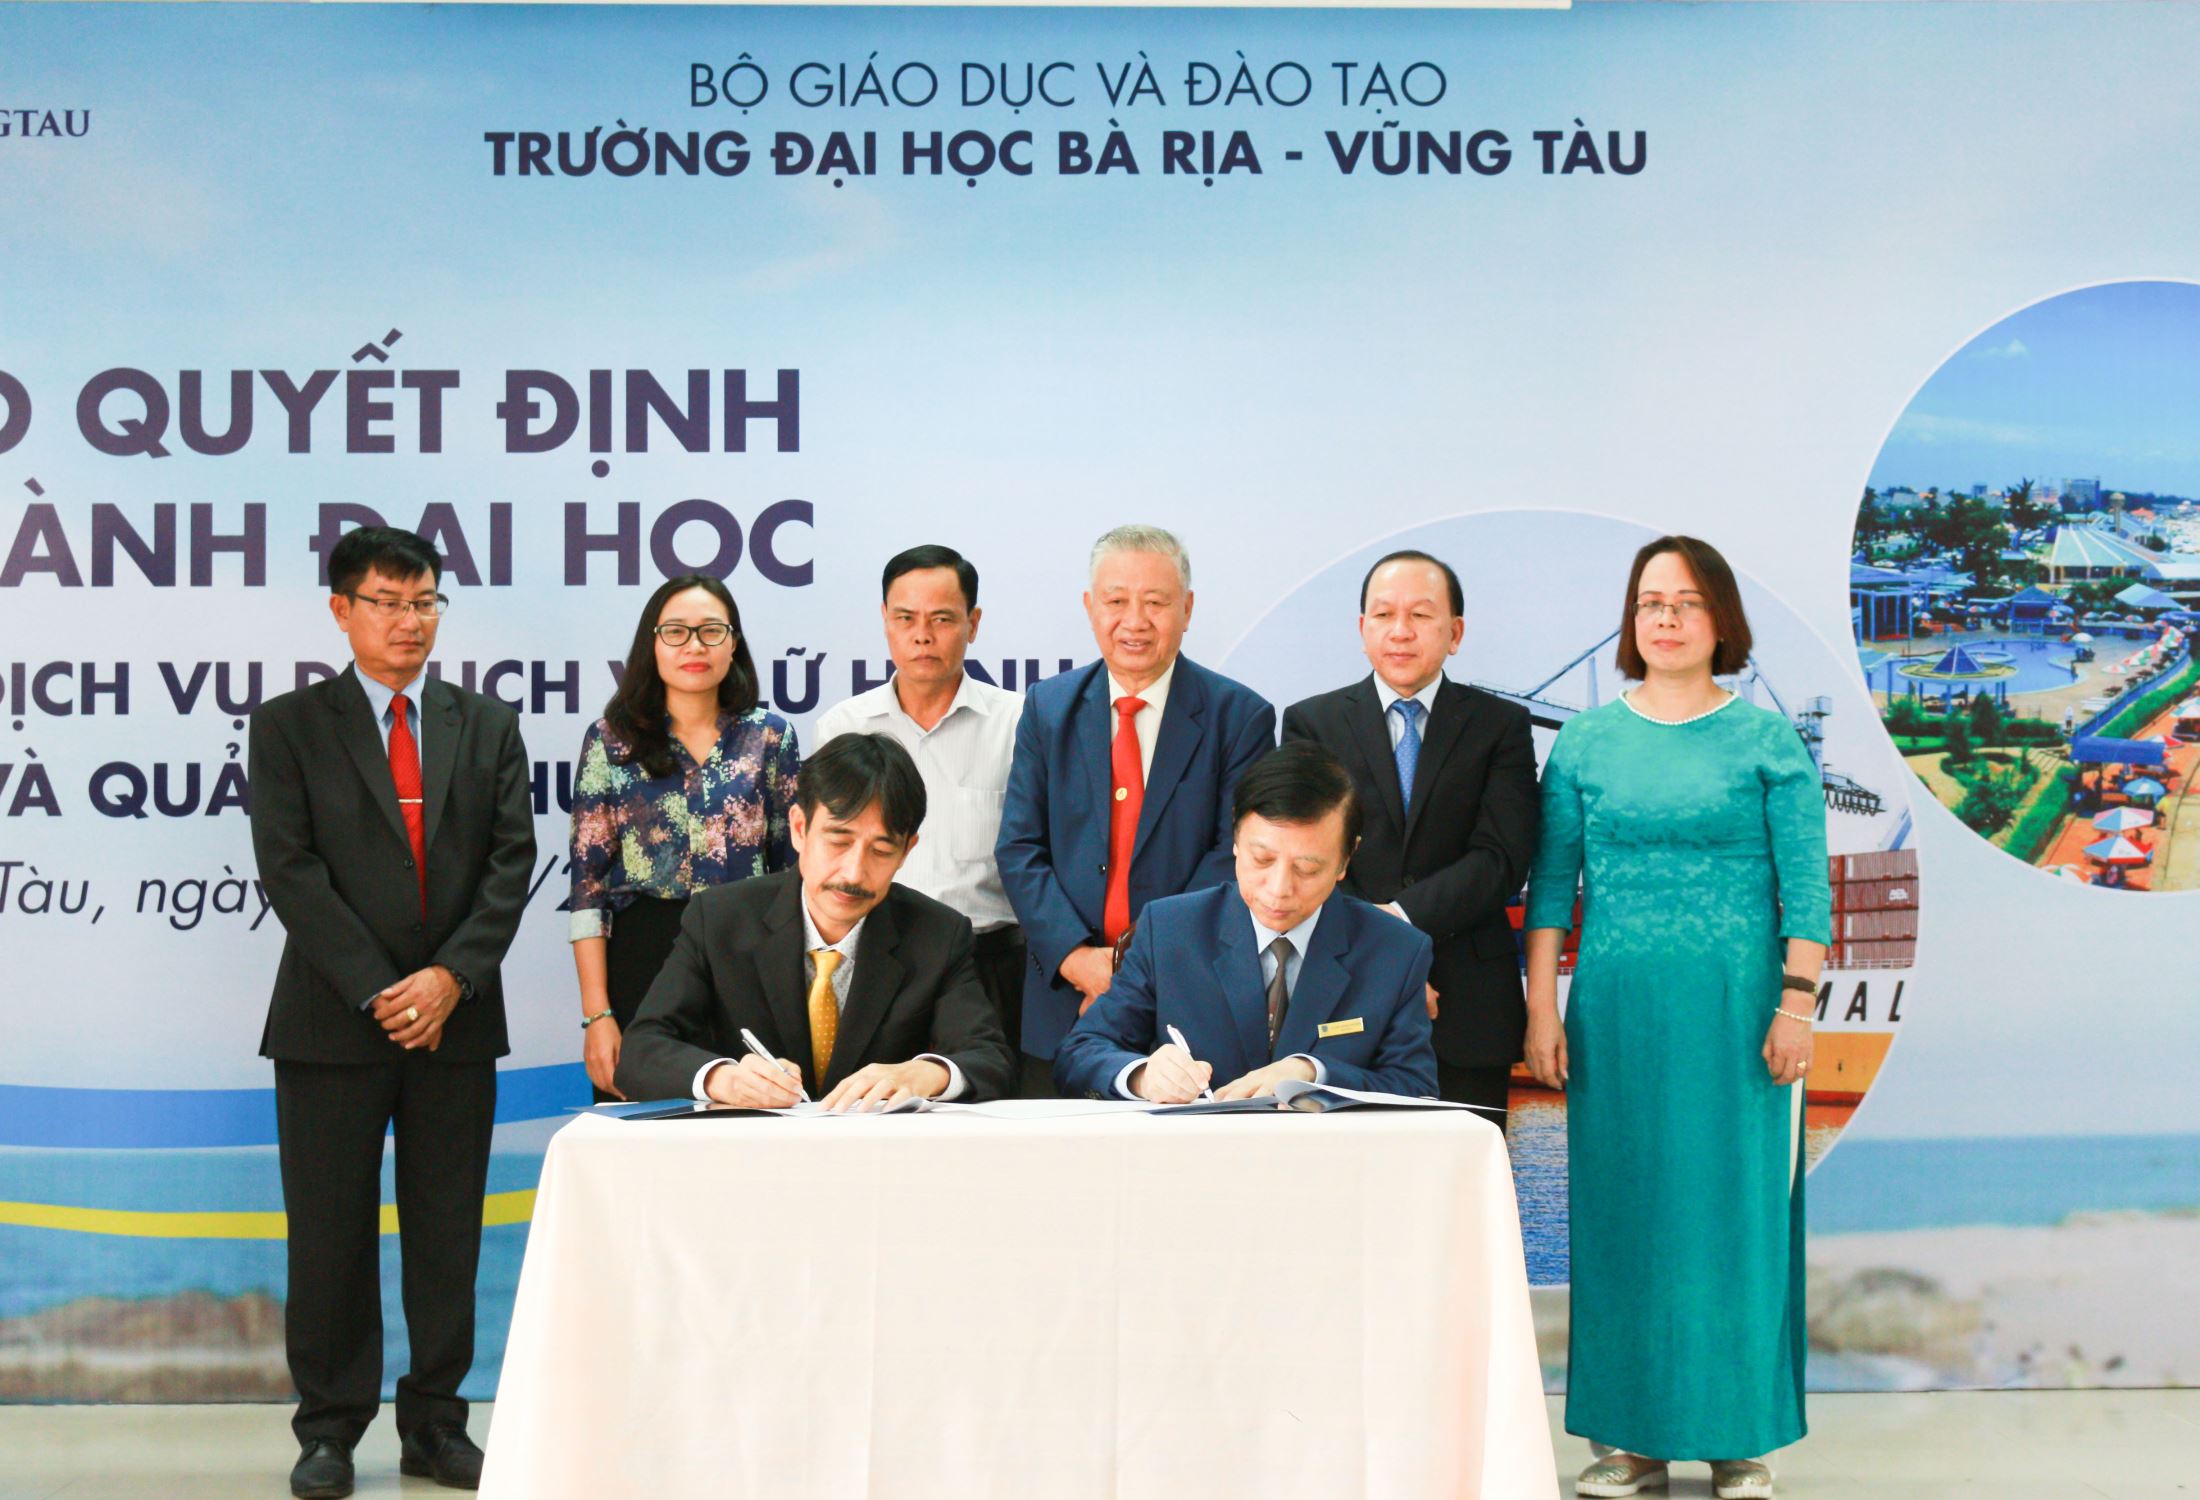 Prof. Dr. Hoang Van Kiem, President of BVU signed MOU with Enterprises at the event